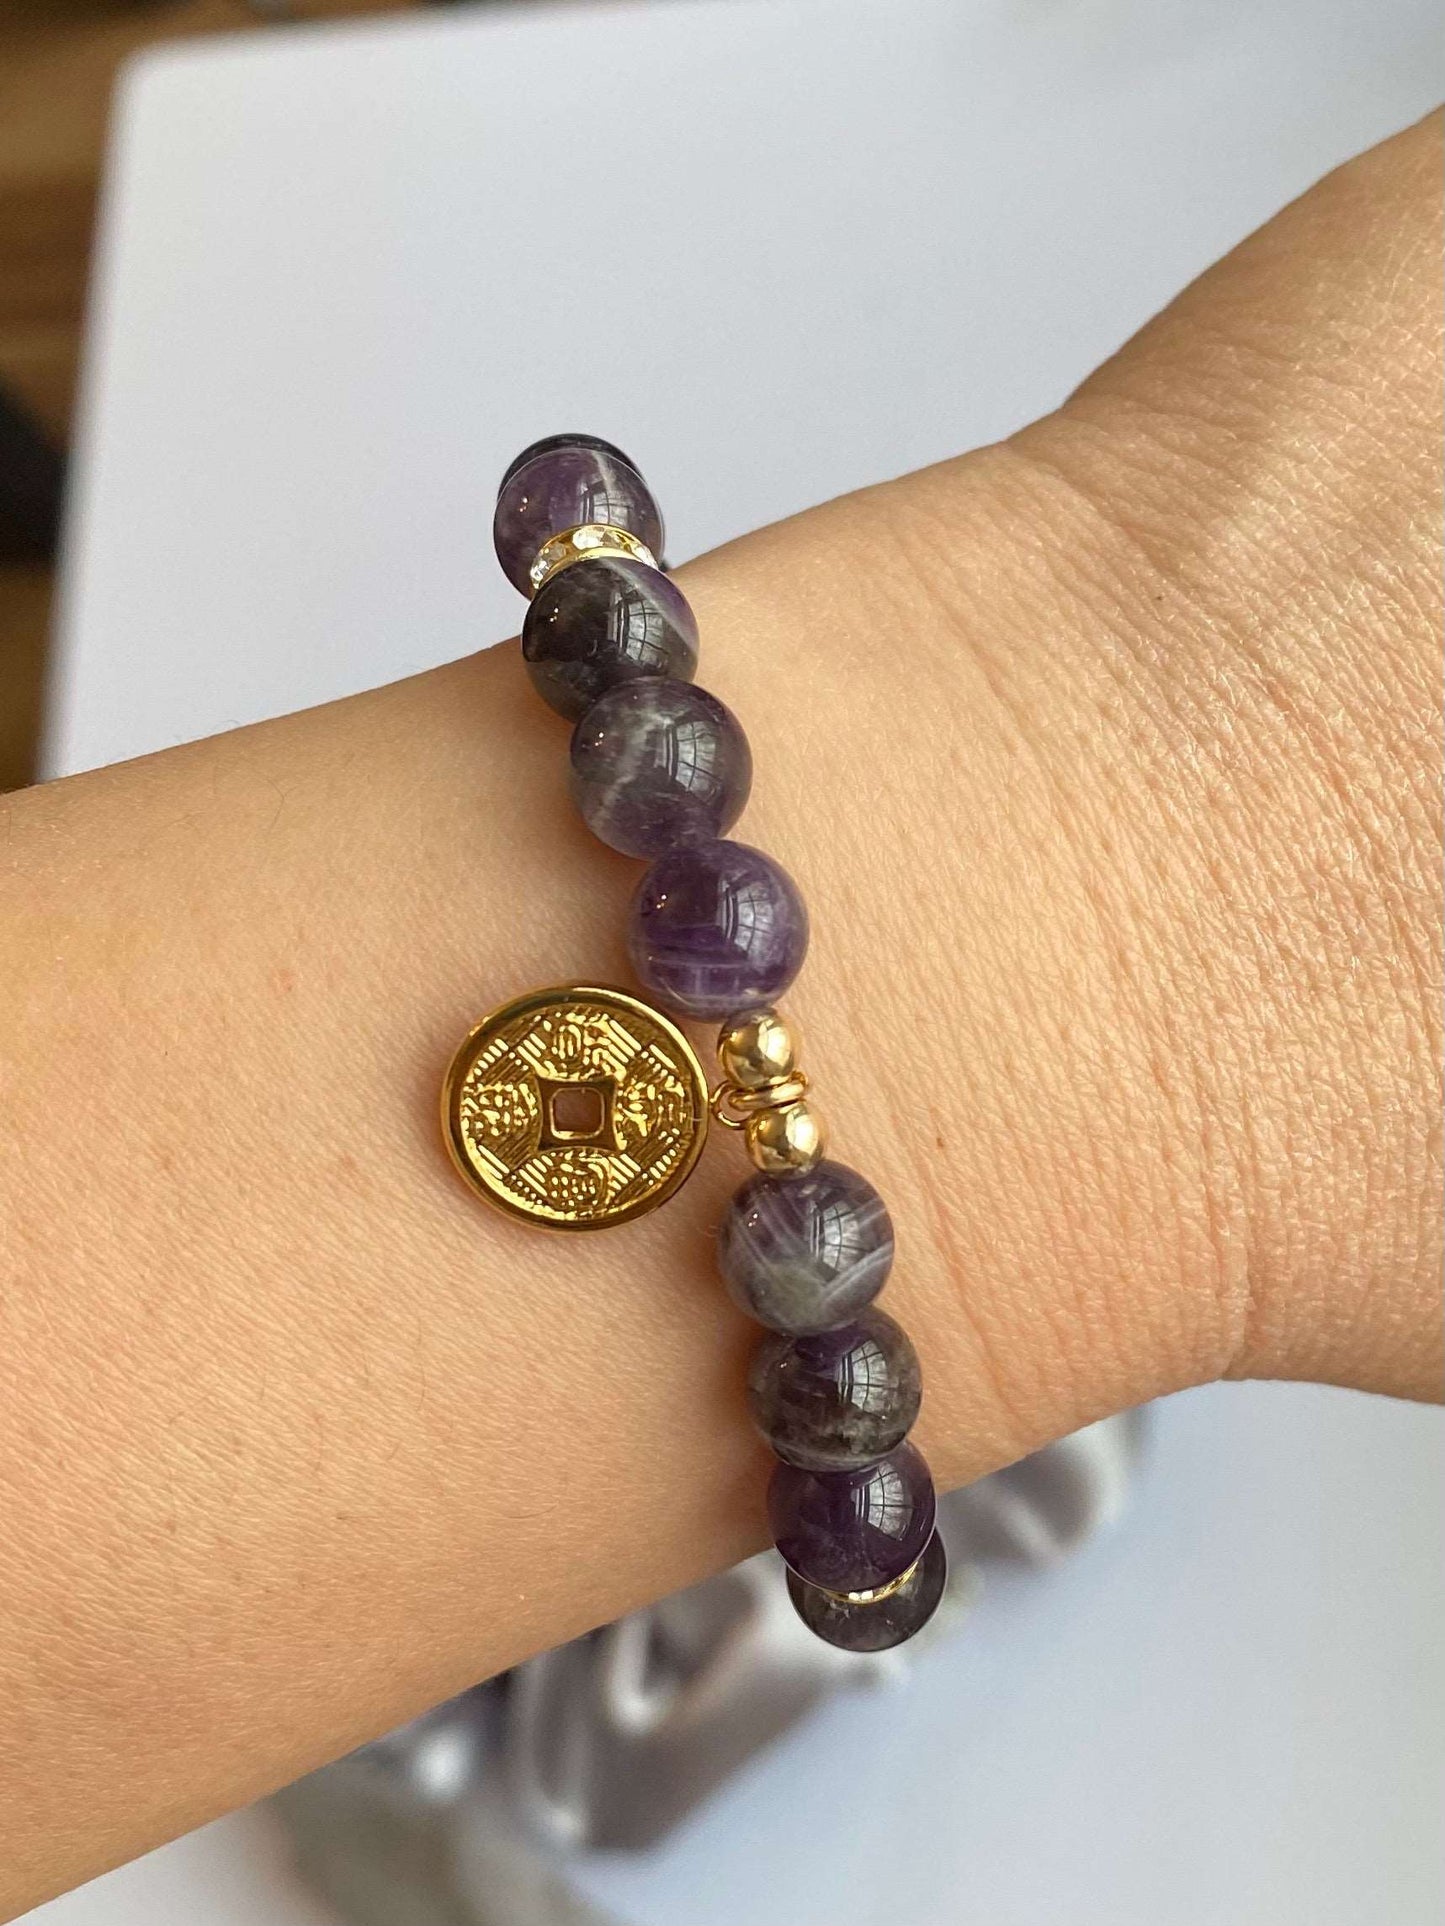 
                  
                    Handmade Natural Amethyst with Lucky Coin Bracelets
                  
                